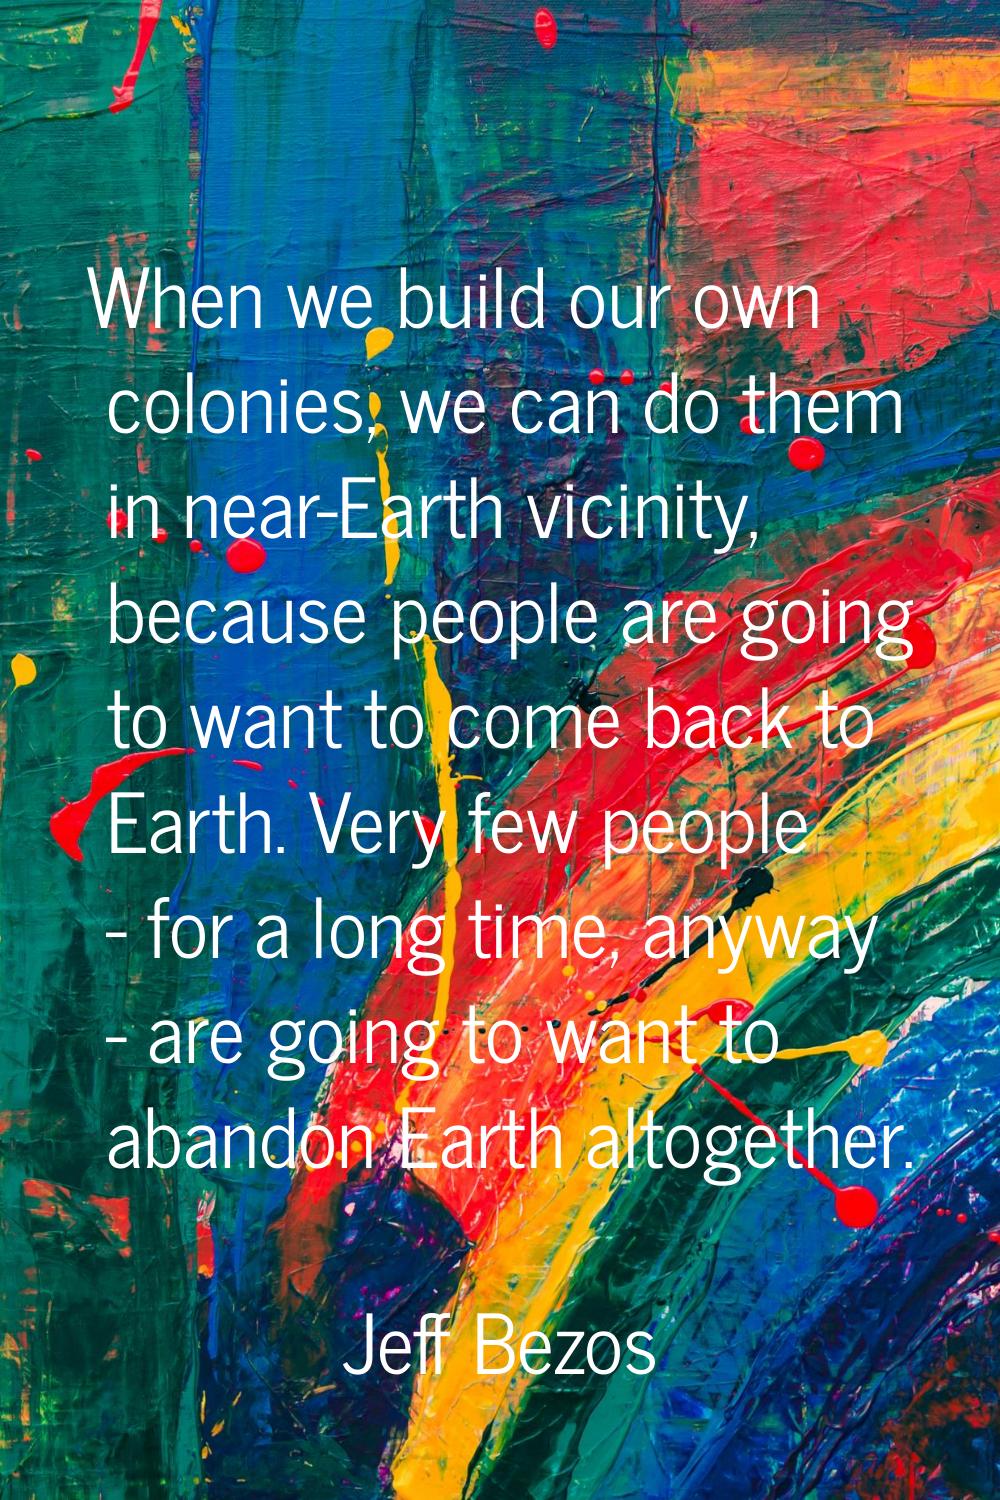 When we build our own colonies, we can do them in near-Earth vicinity, because people are going to 